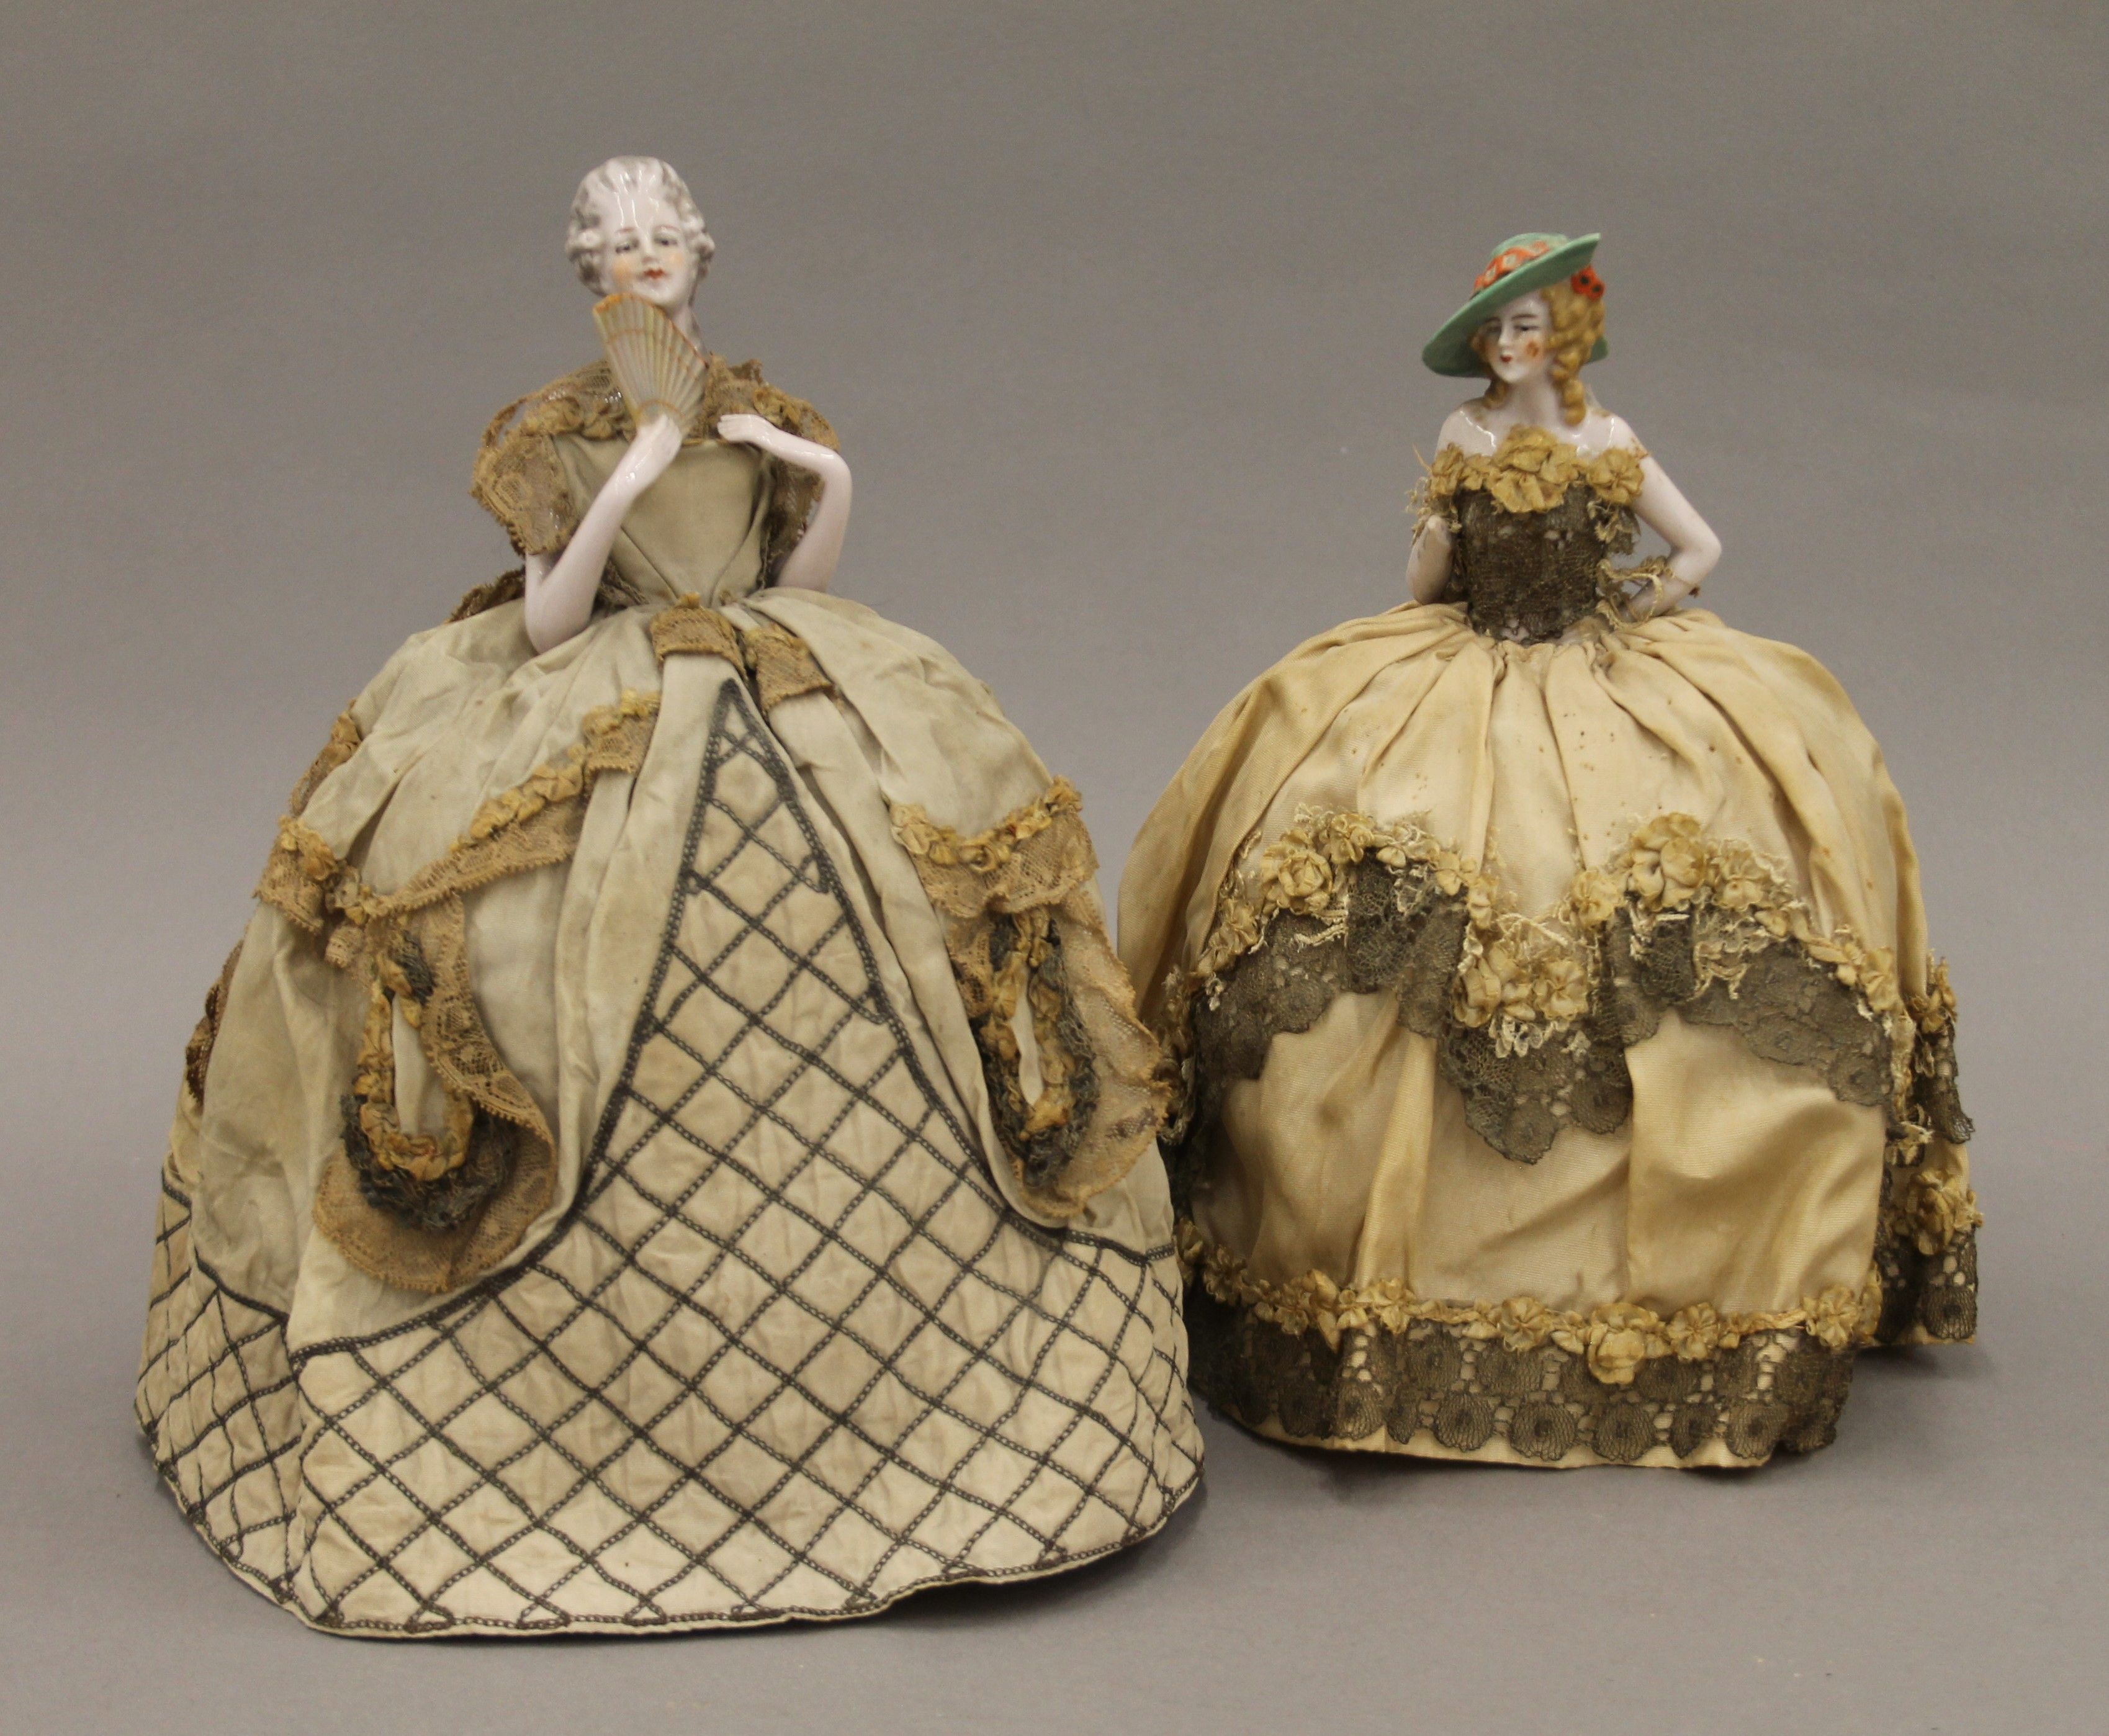 Two late 19th/early 20th century porcelain and lace half dolls. The largest 24 cm high.